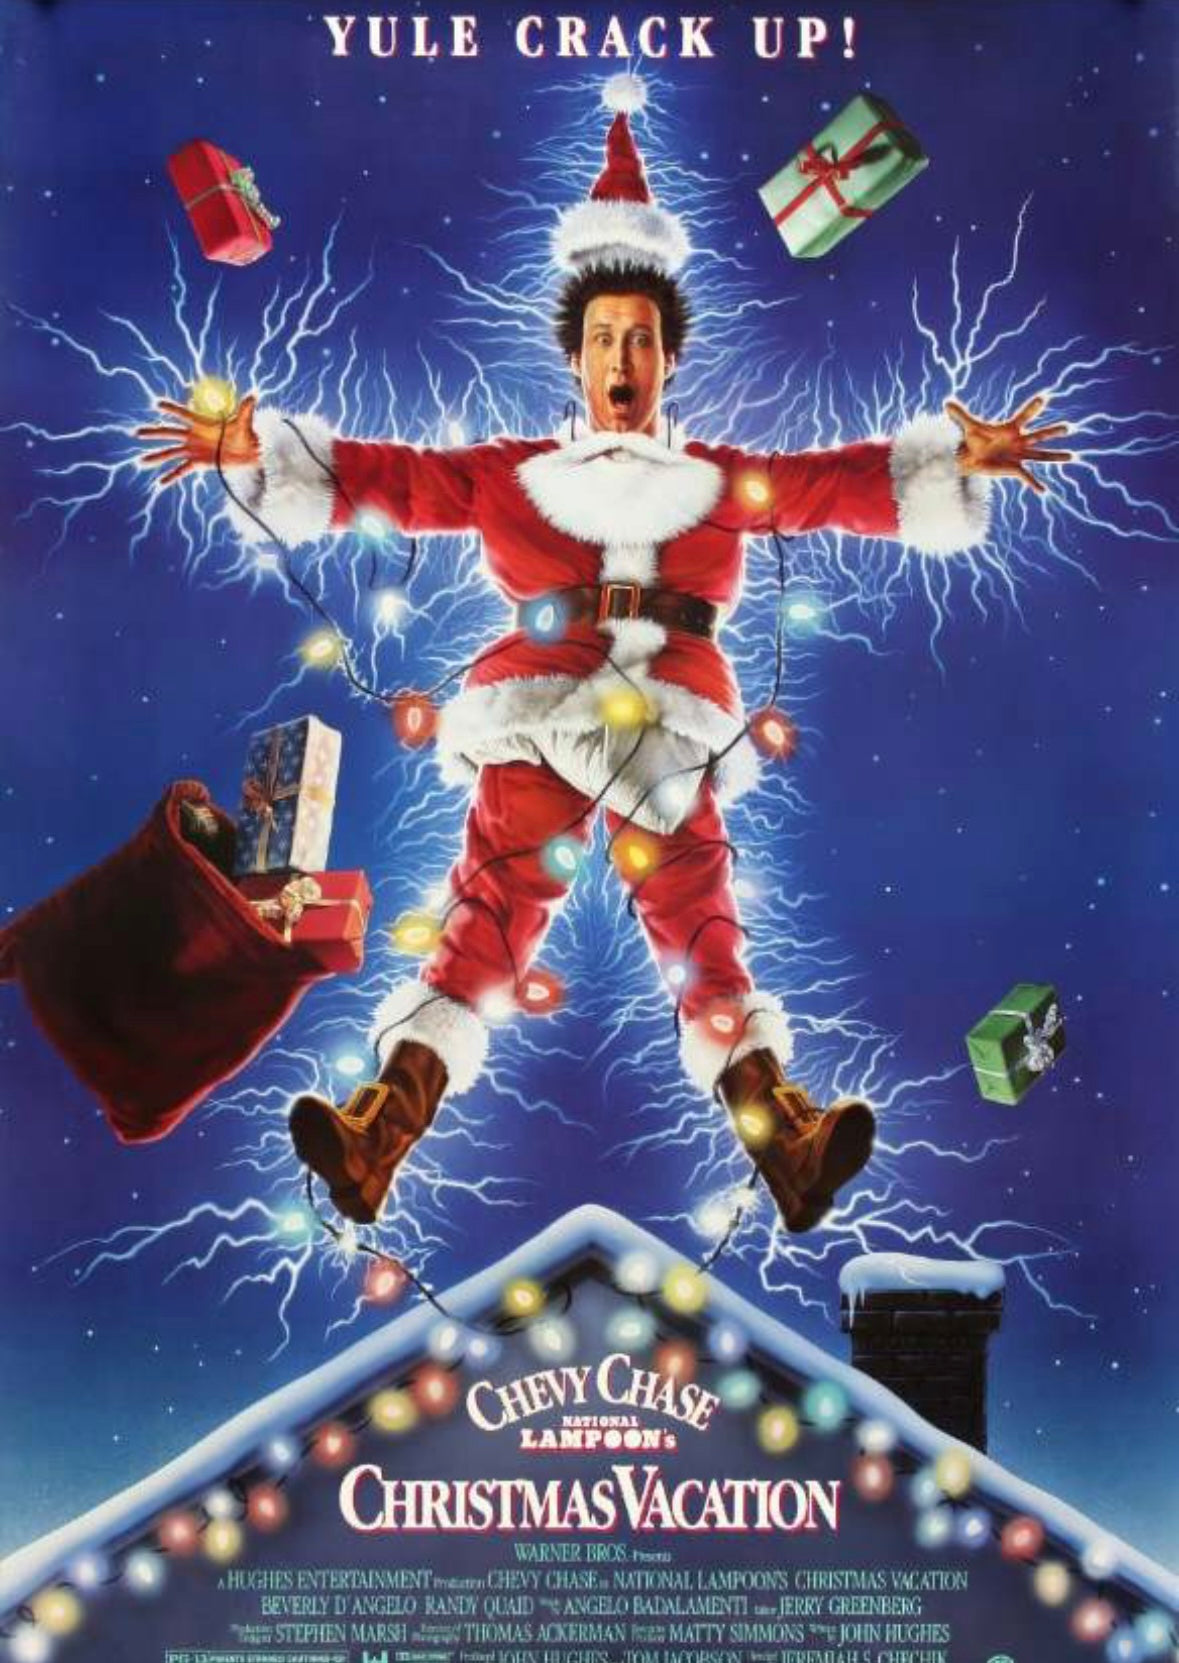 Christmas vacation movie poster 120x160cm